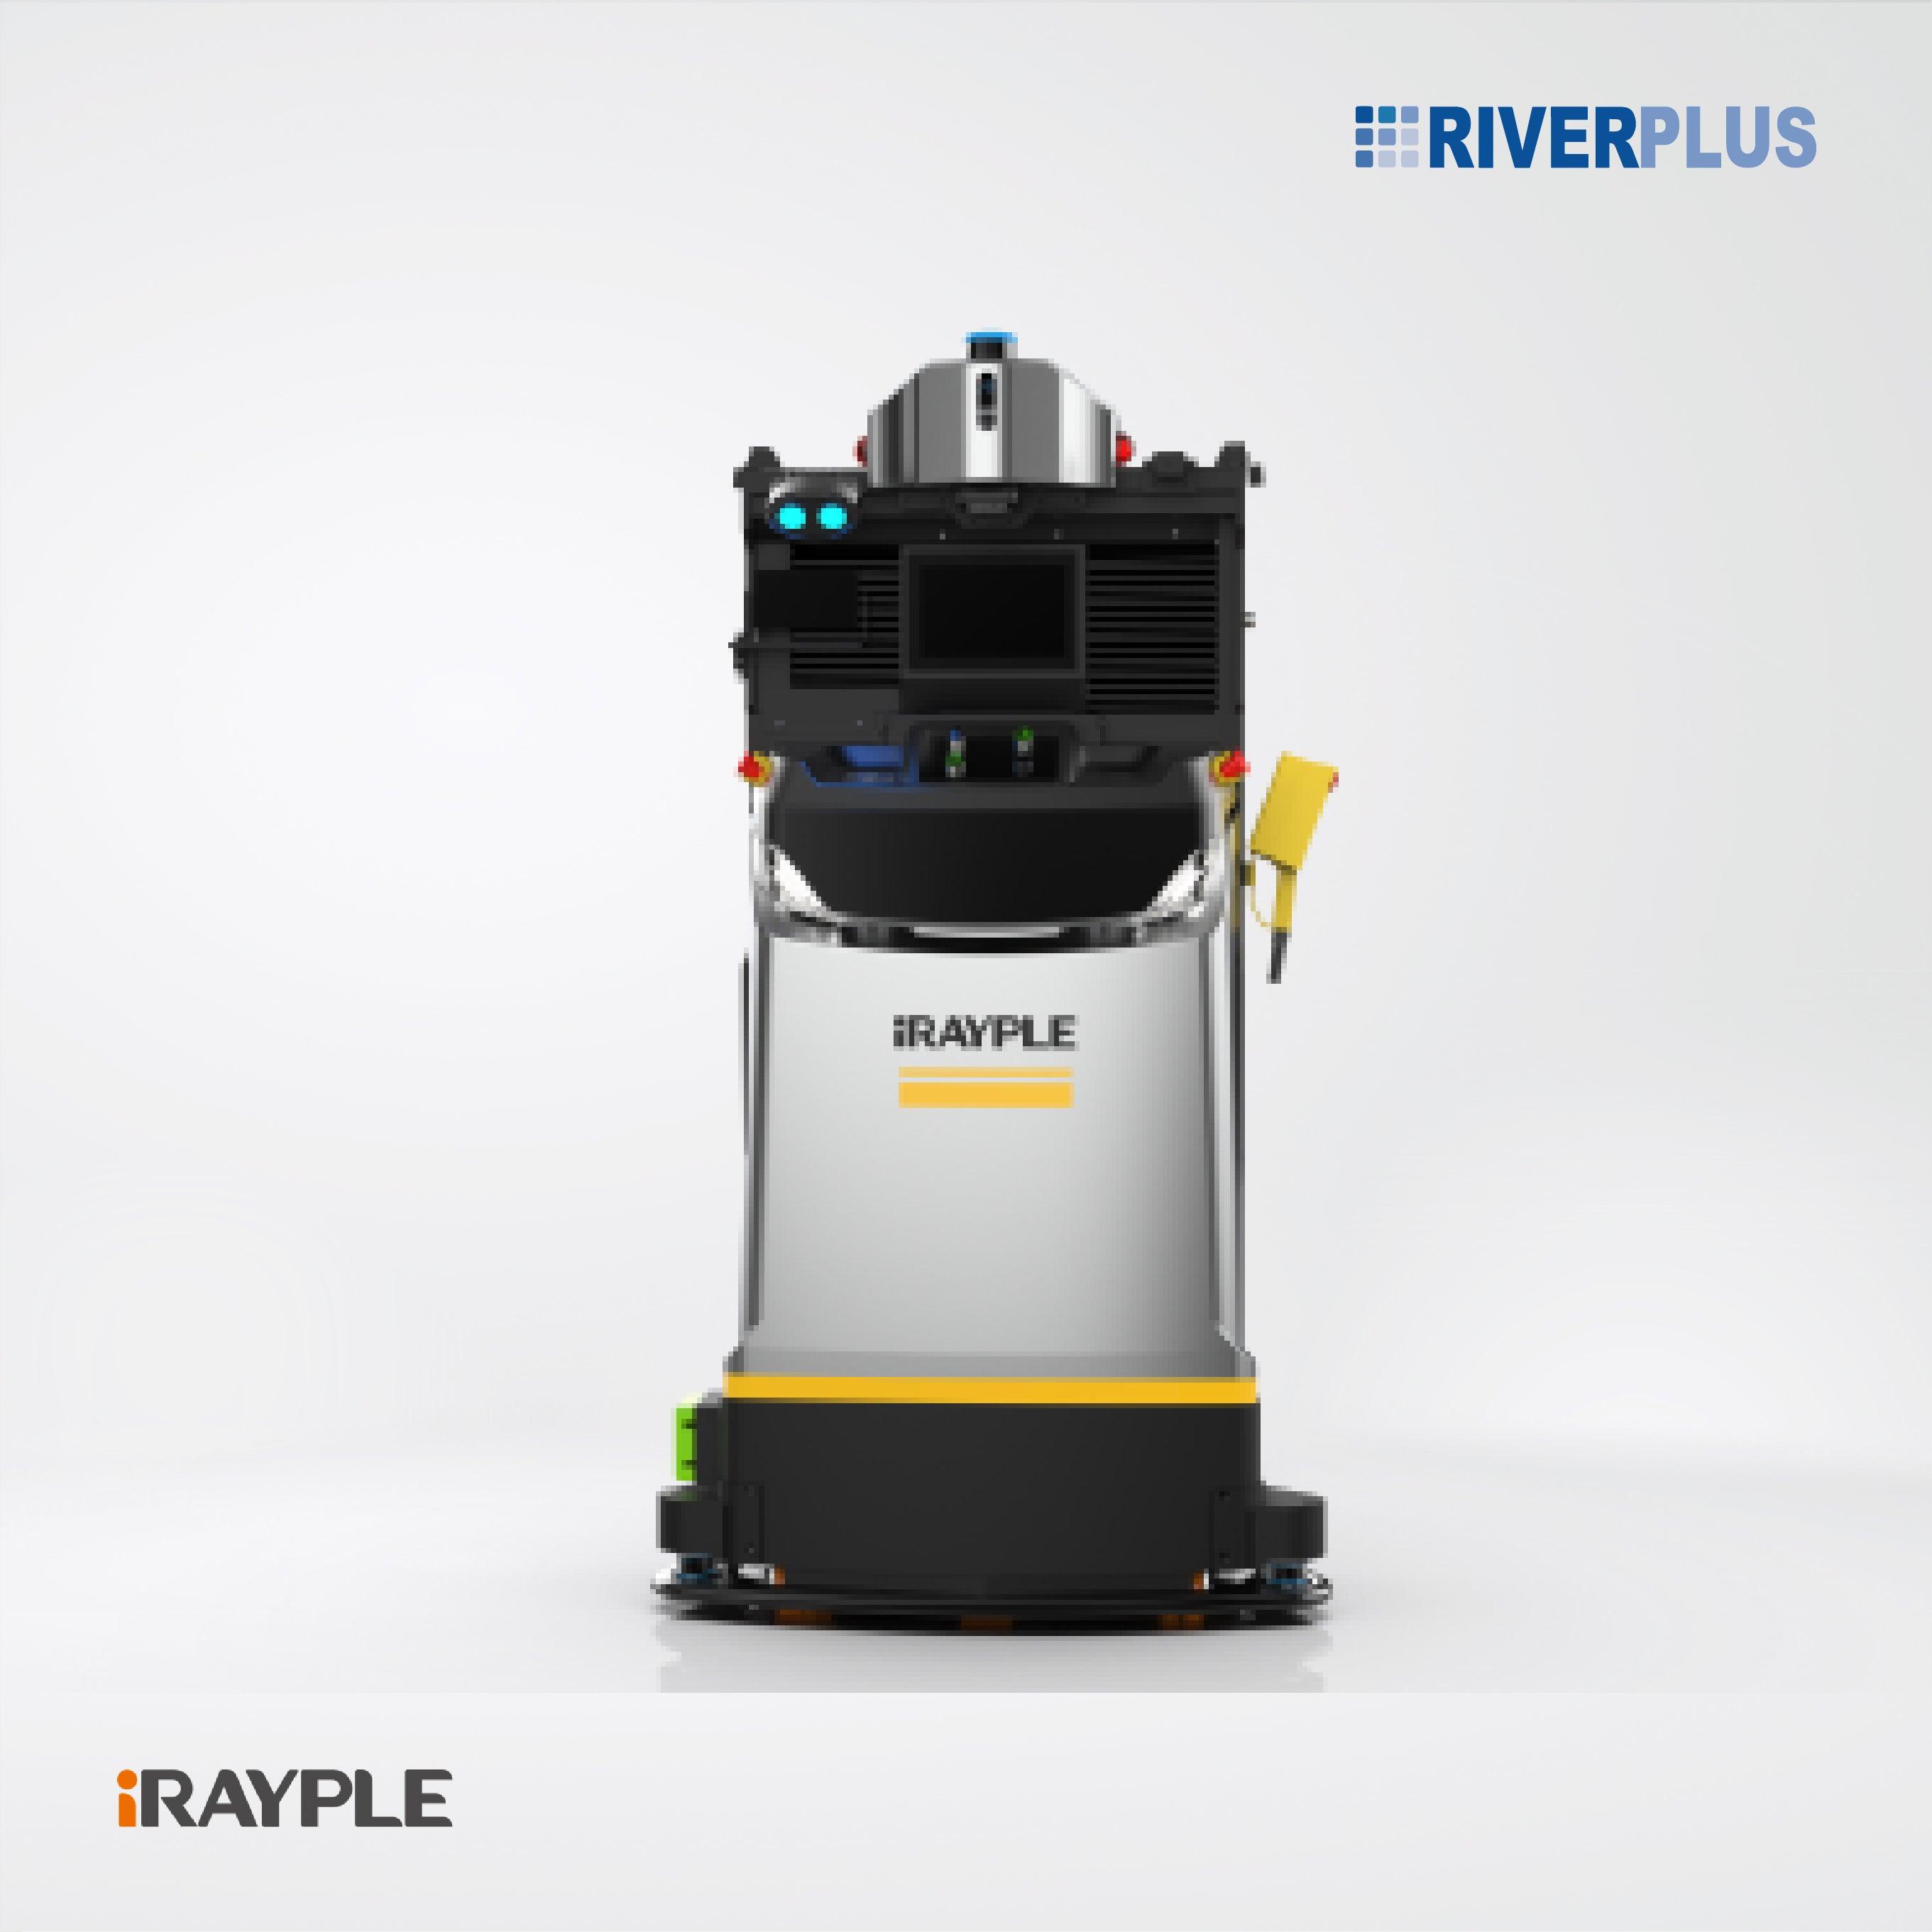 F150A Forklift AMR - Riverplus